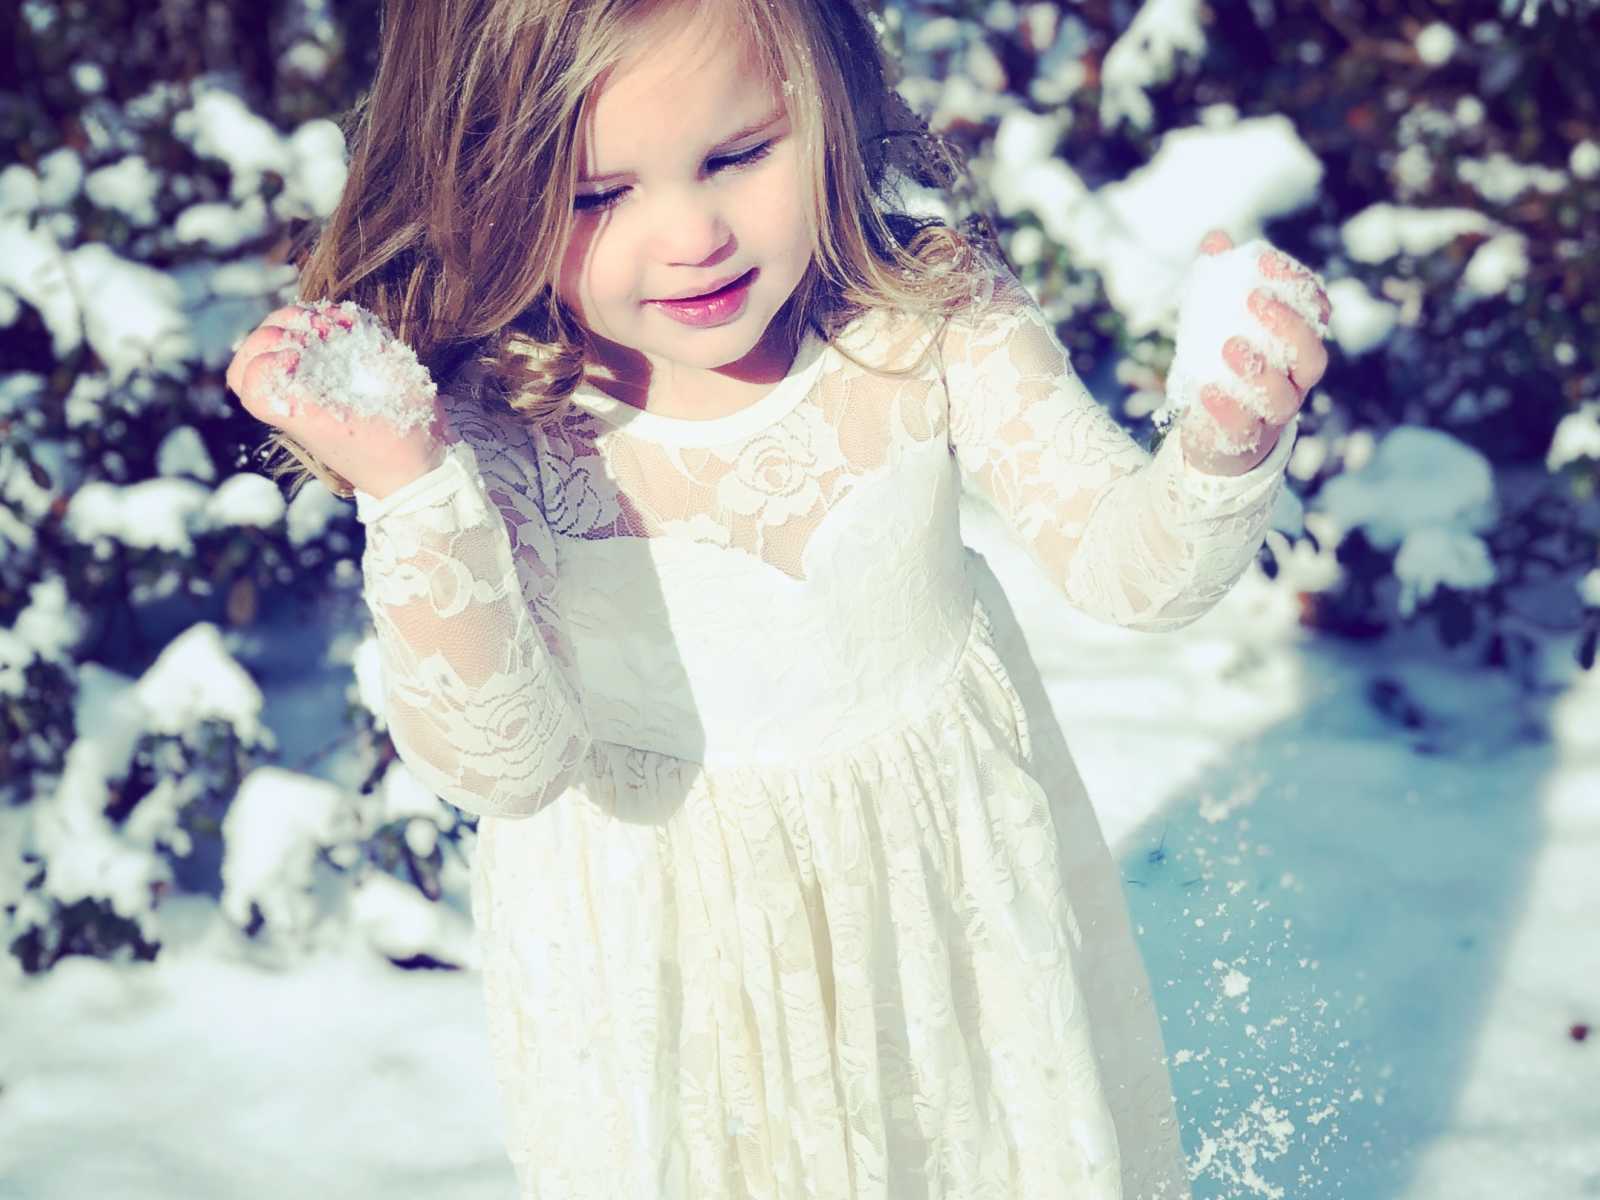 young girl in white floral lace dress with fists full of snow